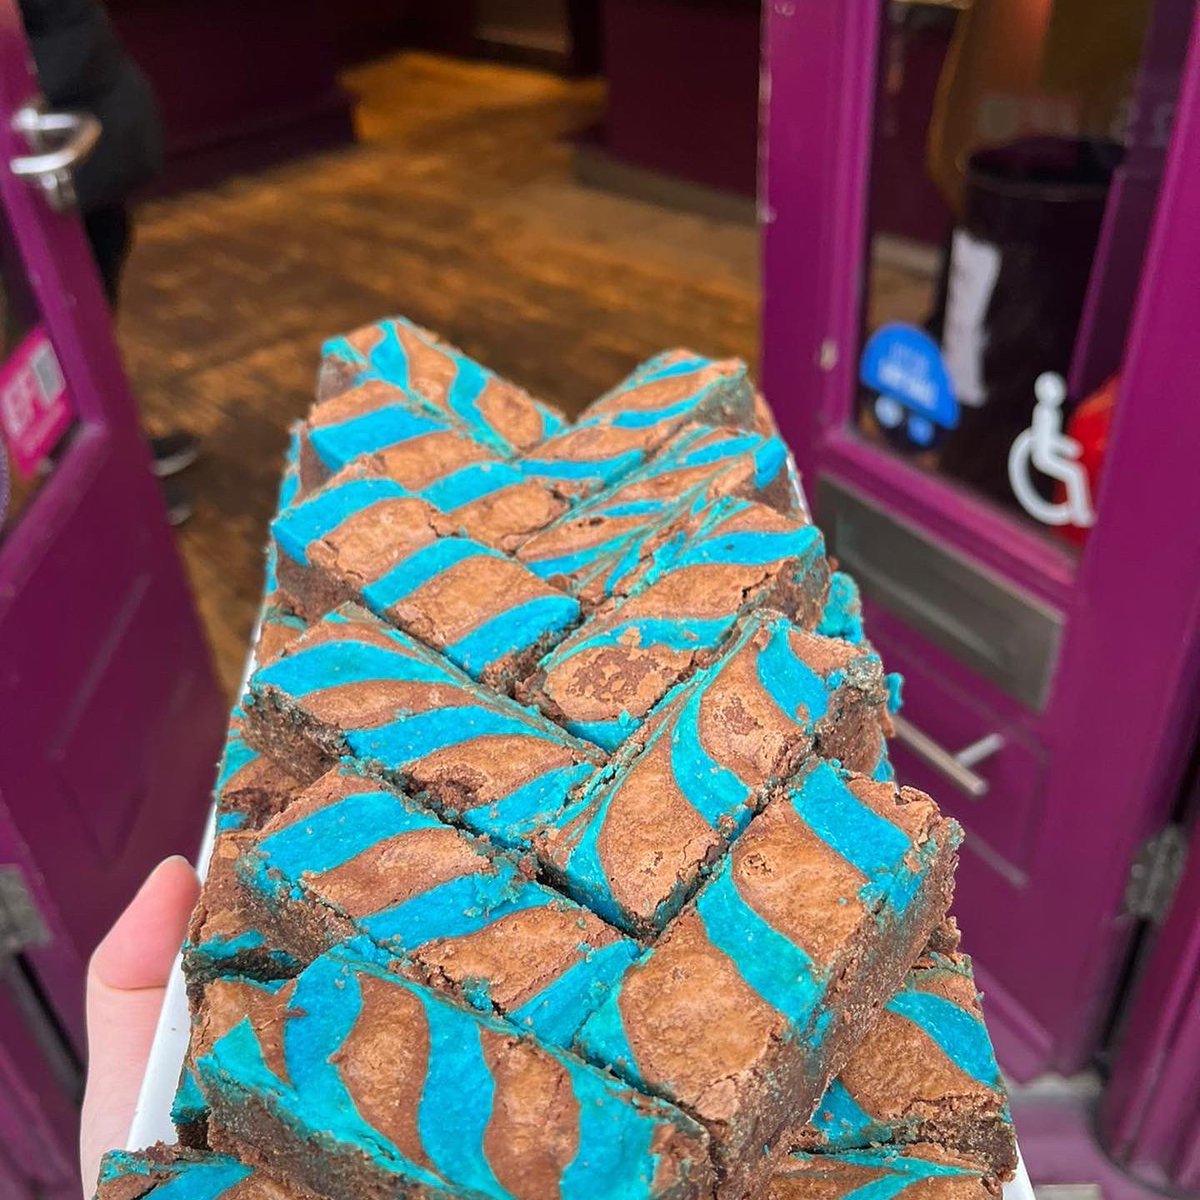 For Blue Monday (16th January) we want to spread joy to all of our wonderful customers by offering a free blue curly Whirly brownie finger with a purchase 👌 Come into any of London stores for this one day offer✨ #bluemonday #bluemondayoffer #graysinnroad #bowlane #waterloo